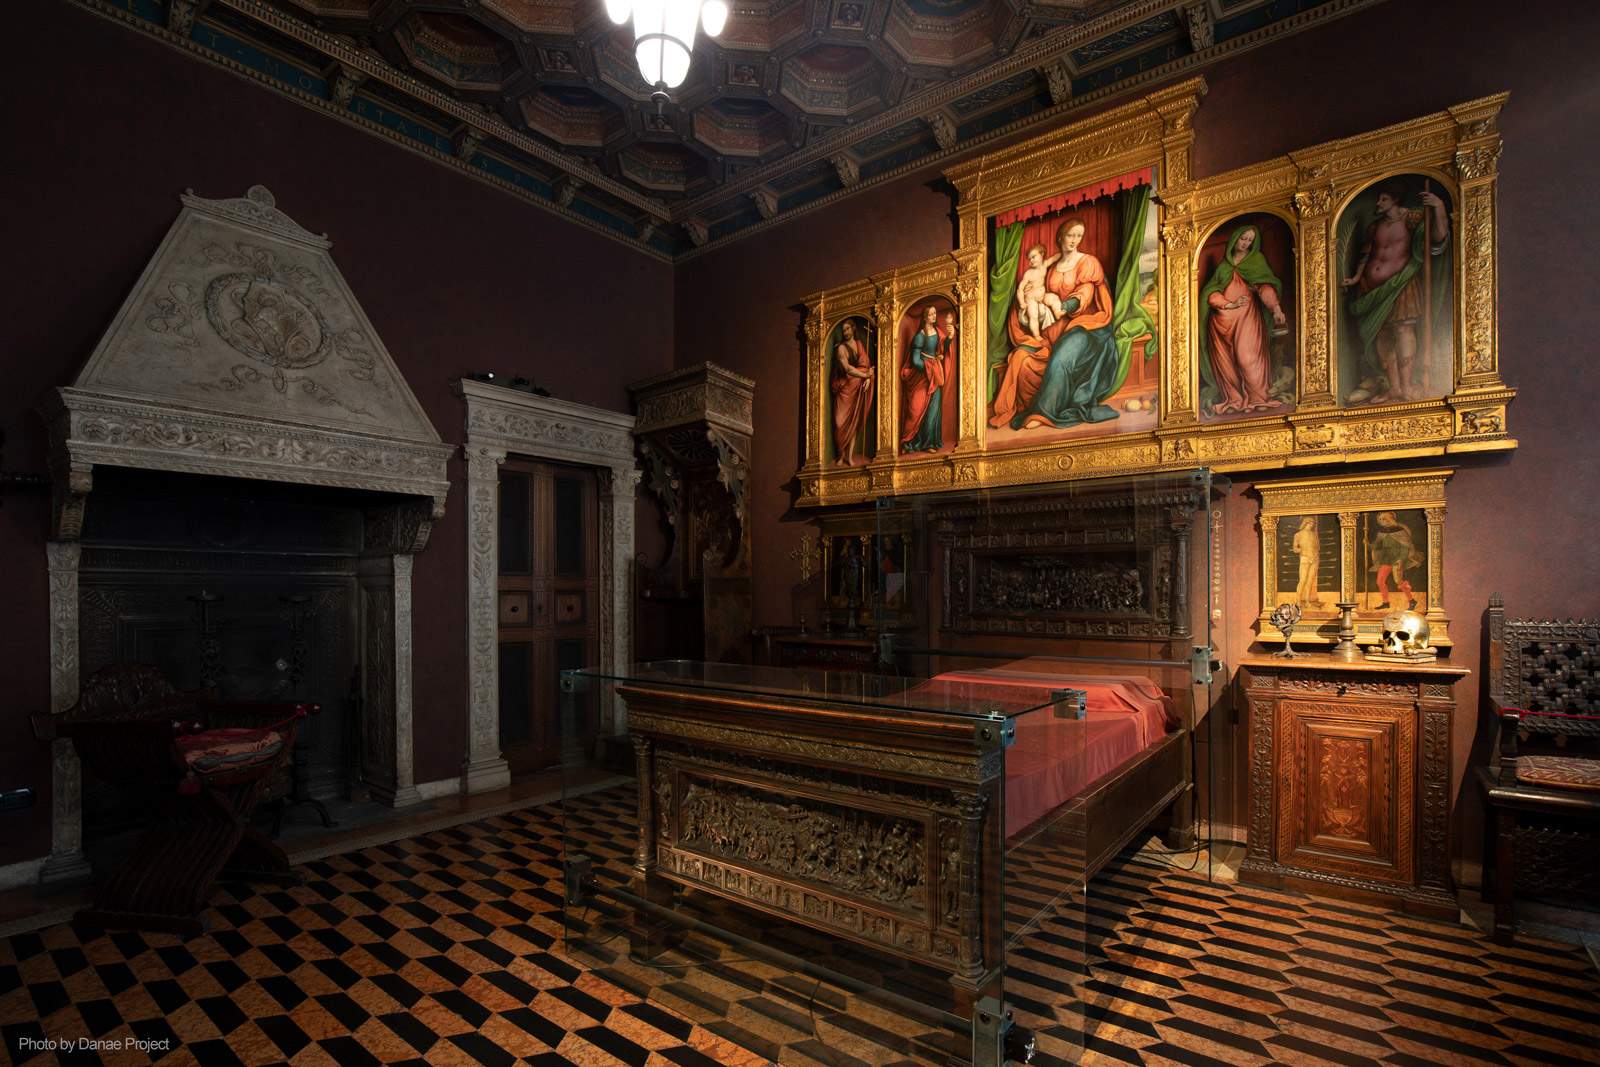 The Bagatti Valsecchi Museum in Milan: we take you there with the new issue of our print magazine. Here are the photos